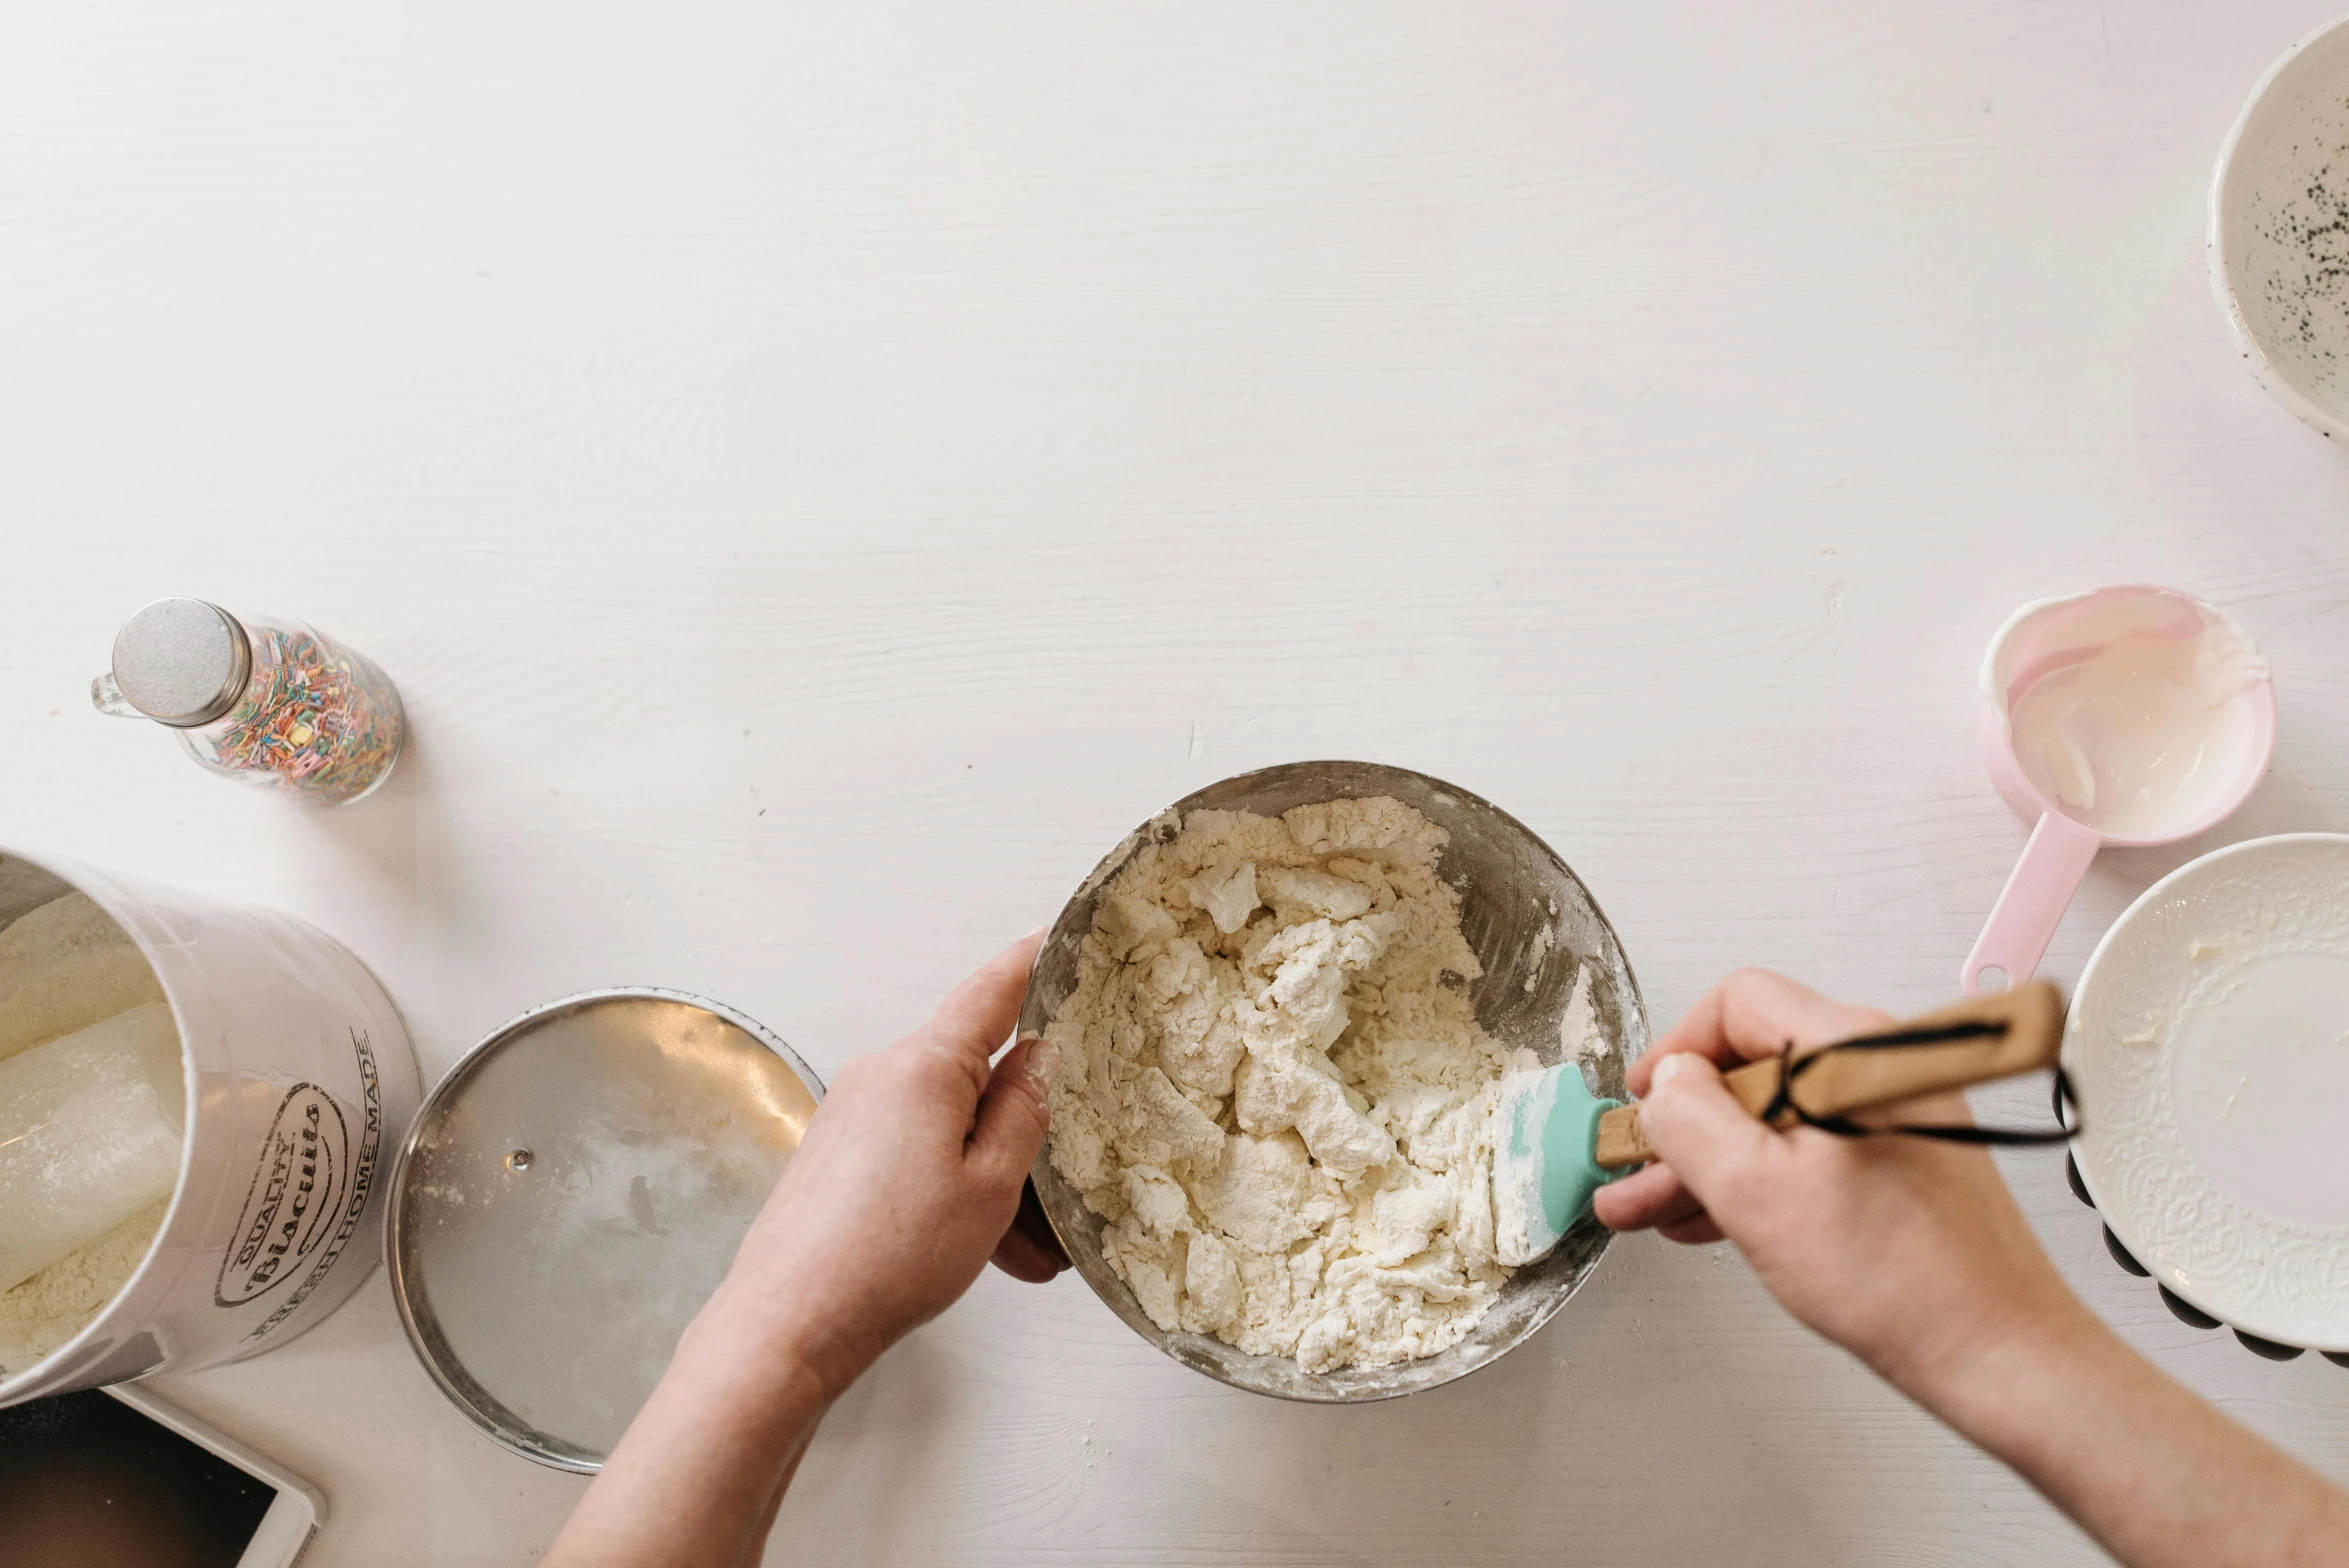 a person mixing ingredients in a bowl on a table, by Ruth Simpson, trending on unsplash, silver，ivory, bakery, background image